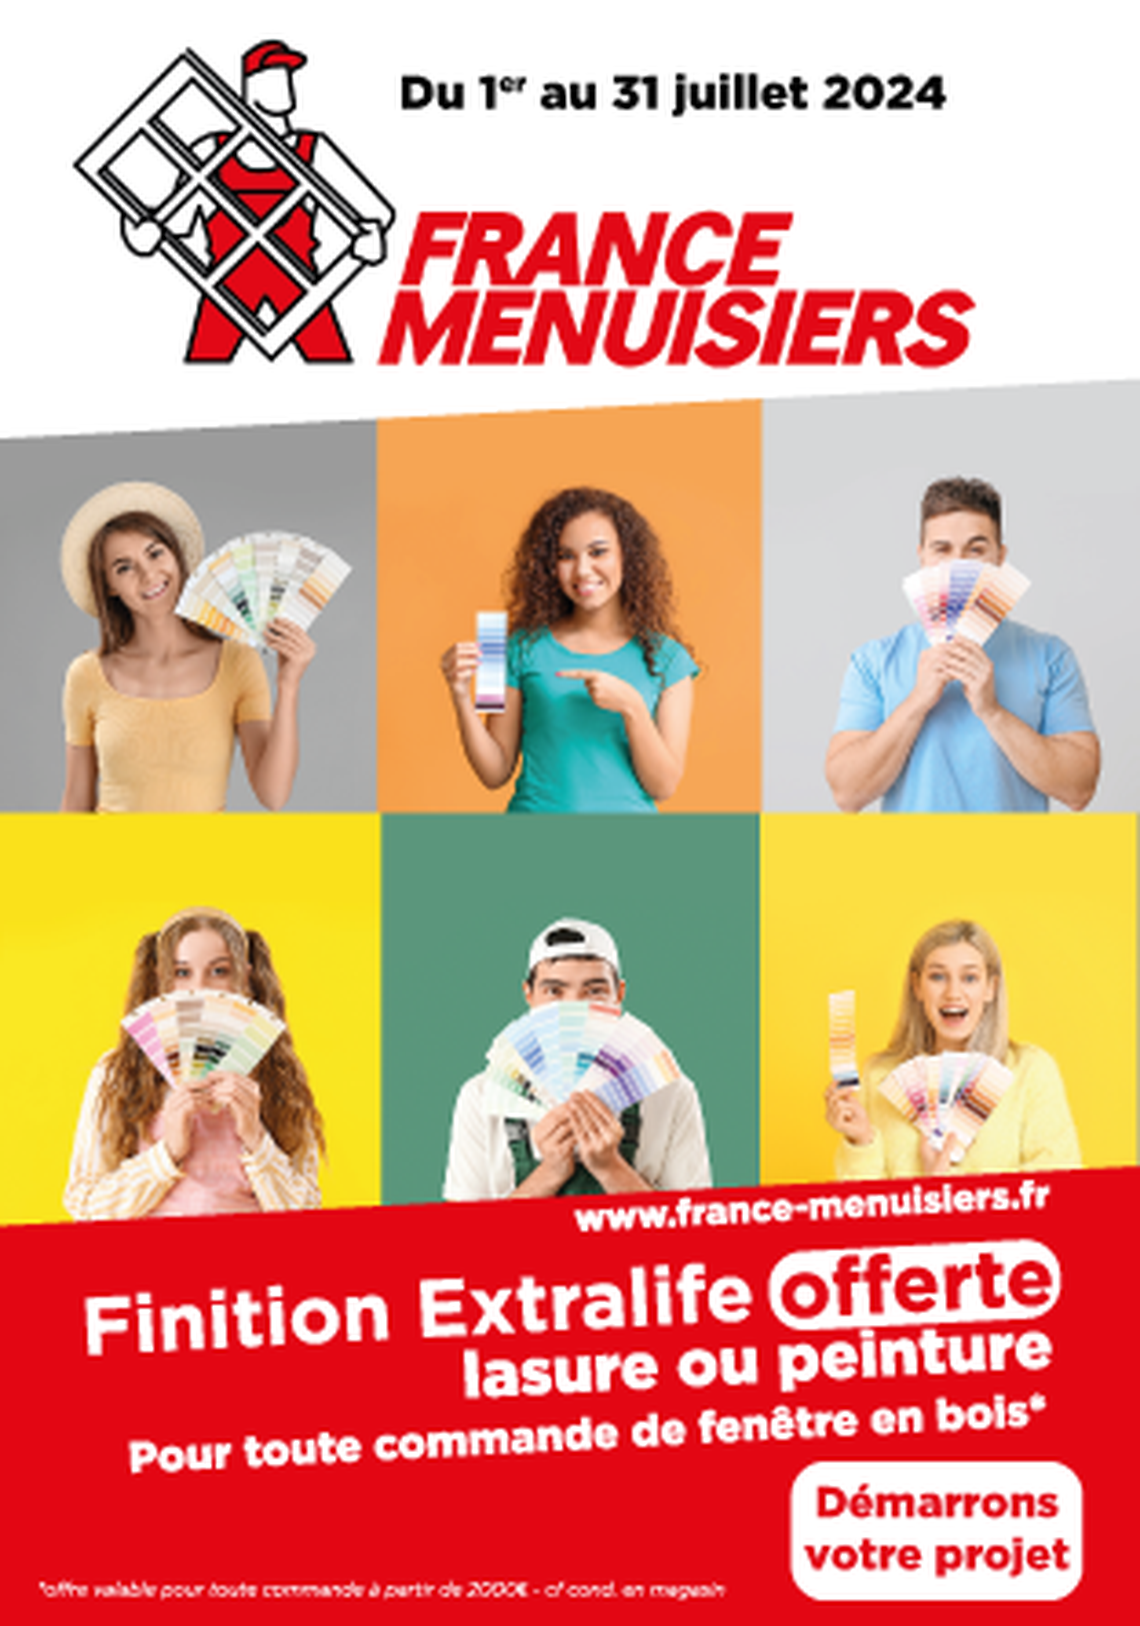 FRANCE MENUISIERS  Meaux - Finition Extralife Offerte